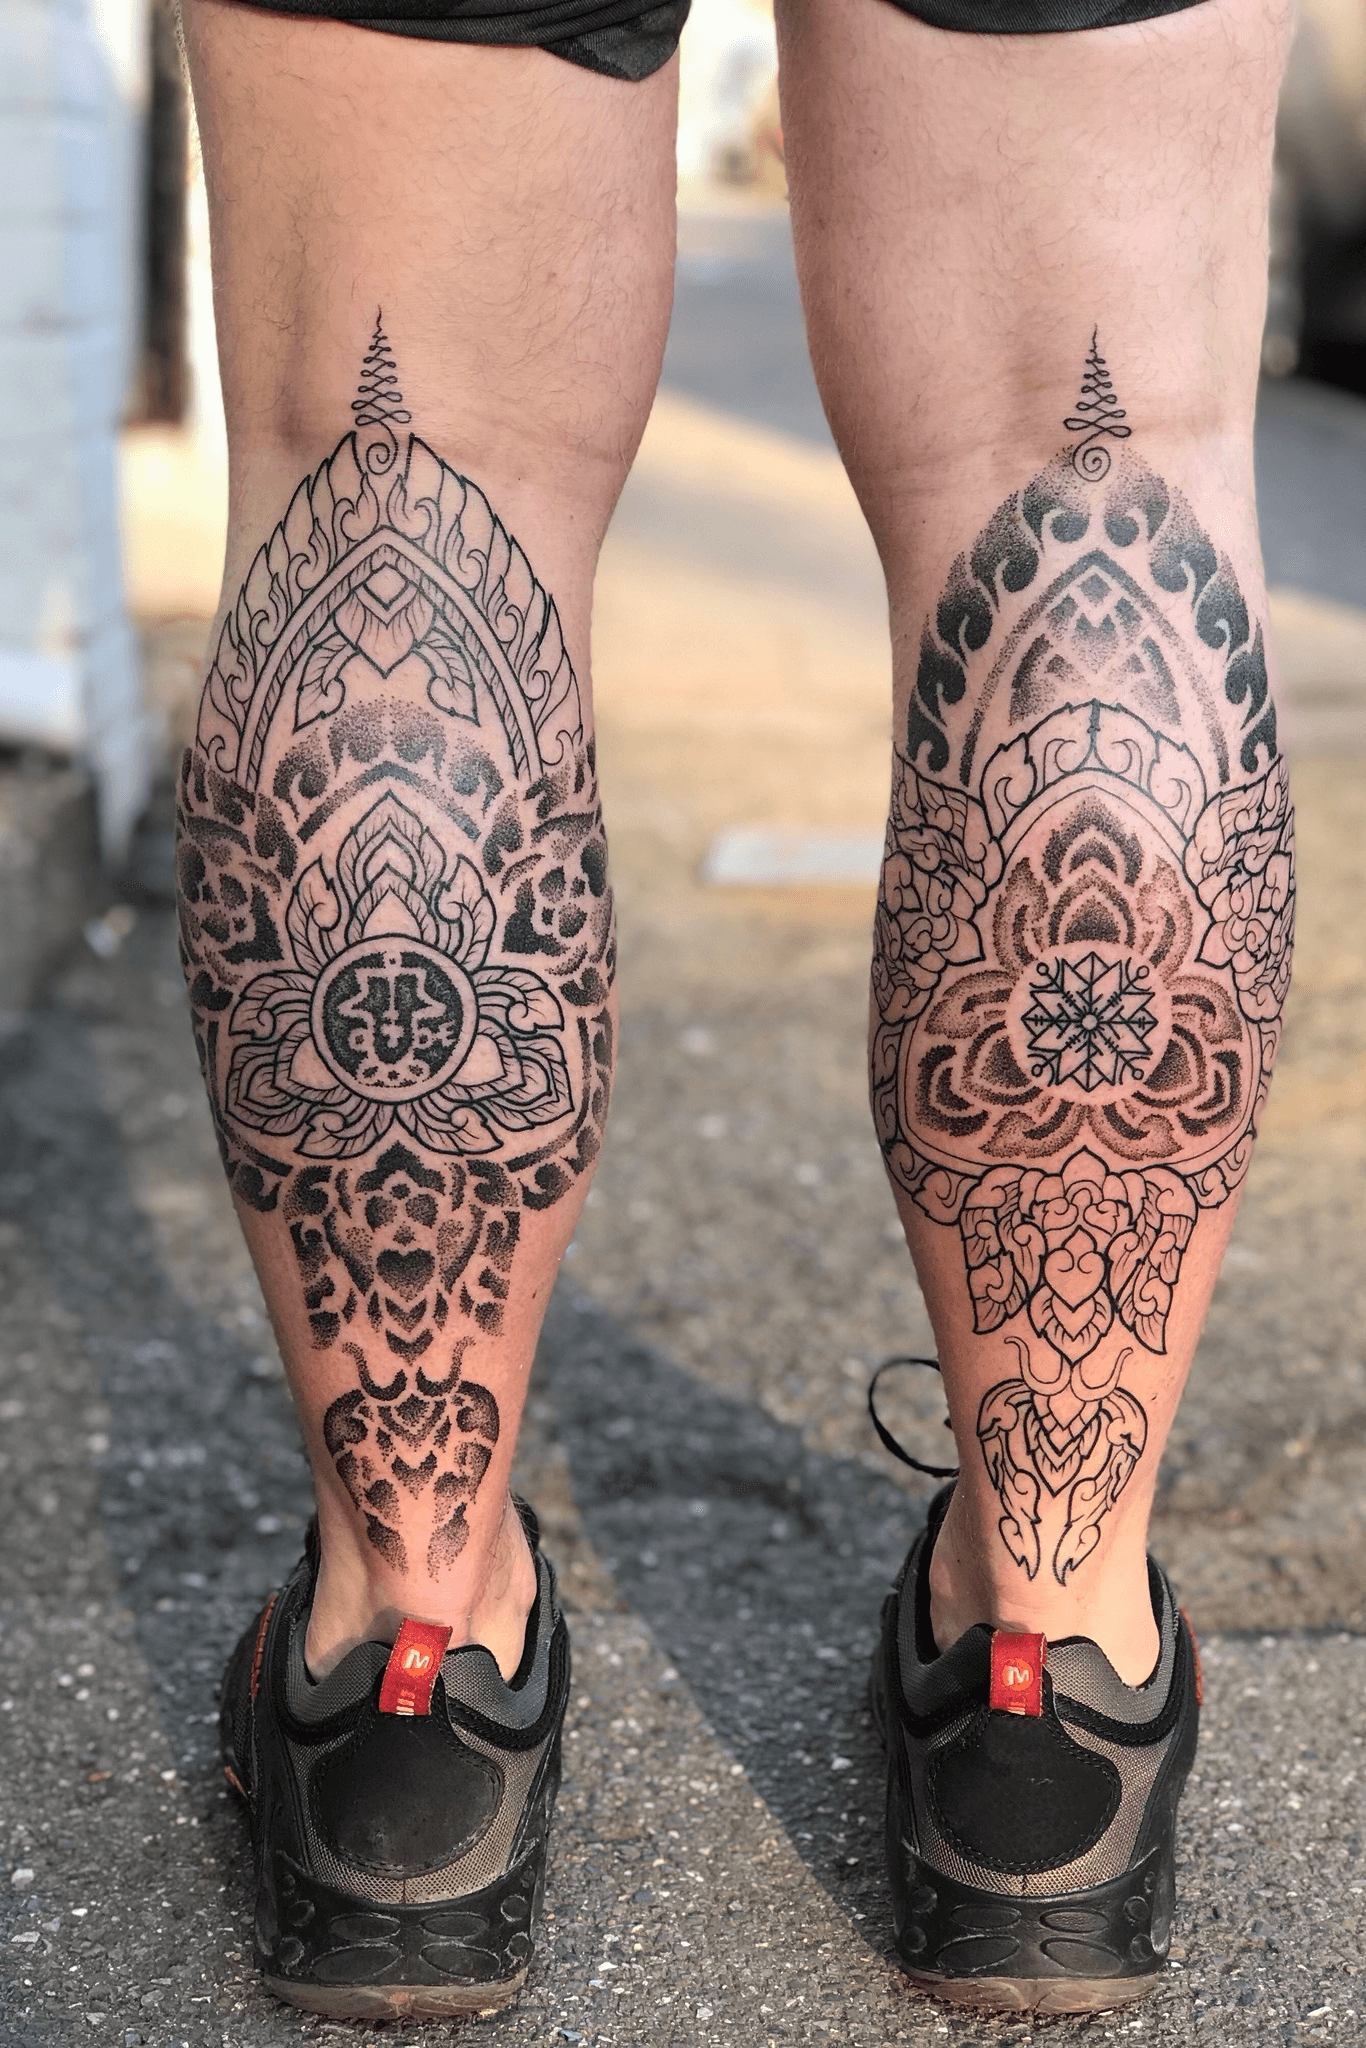 60 Classy Side Thigh Tattoos Insights Meanings  Best Designs  InkMatch